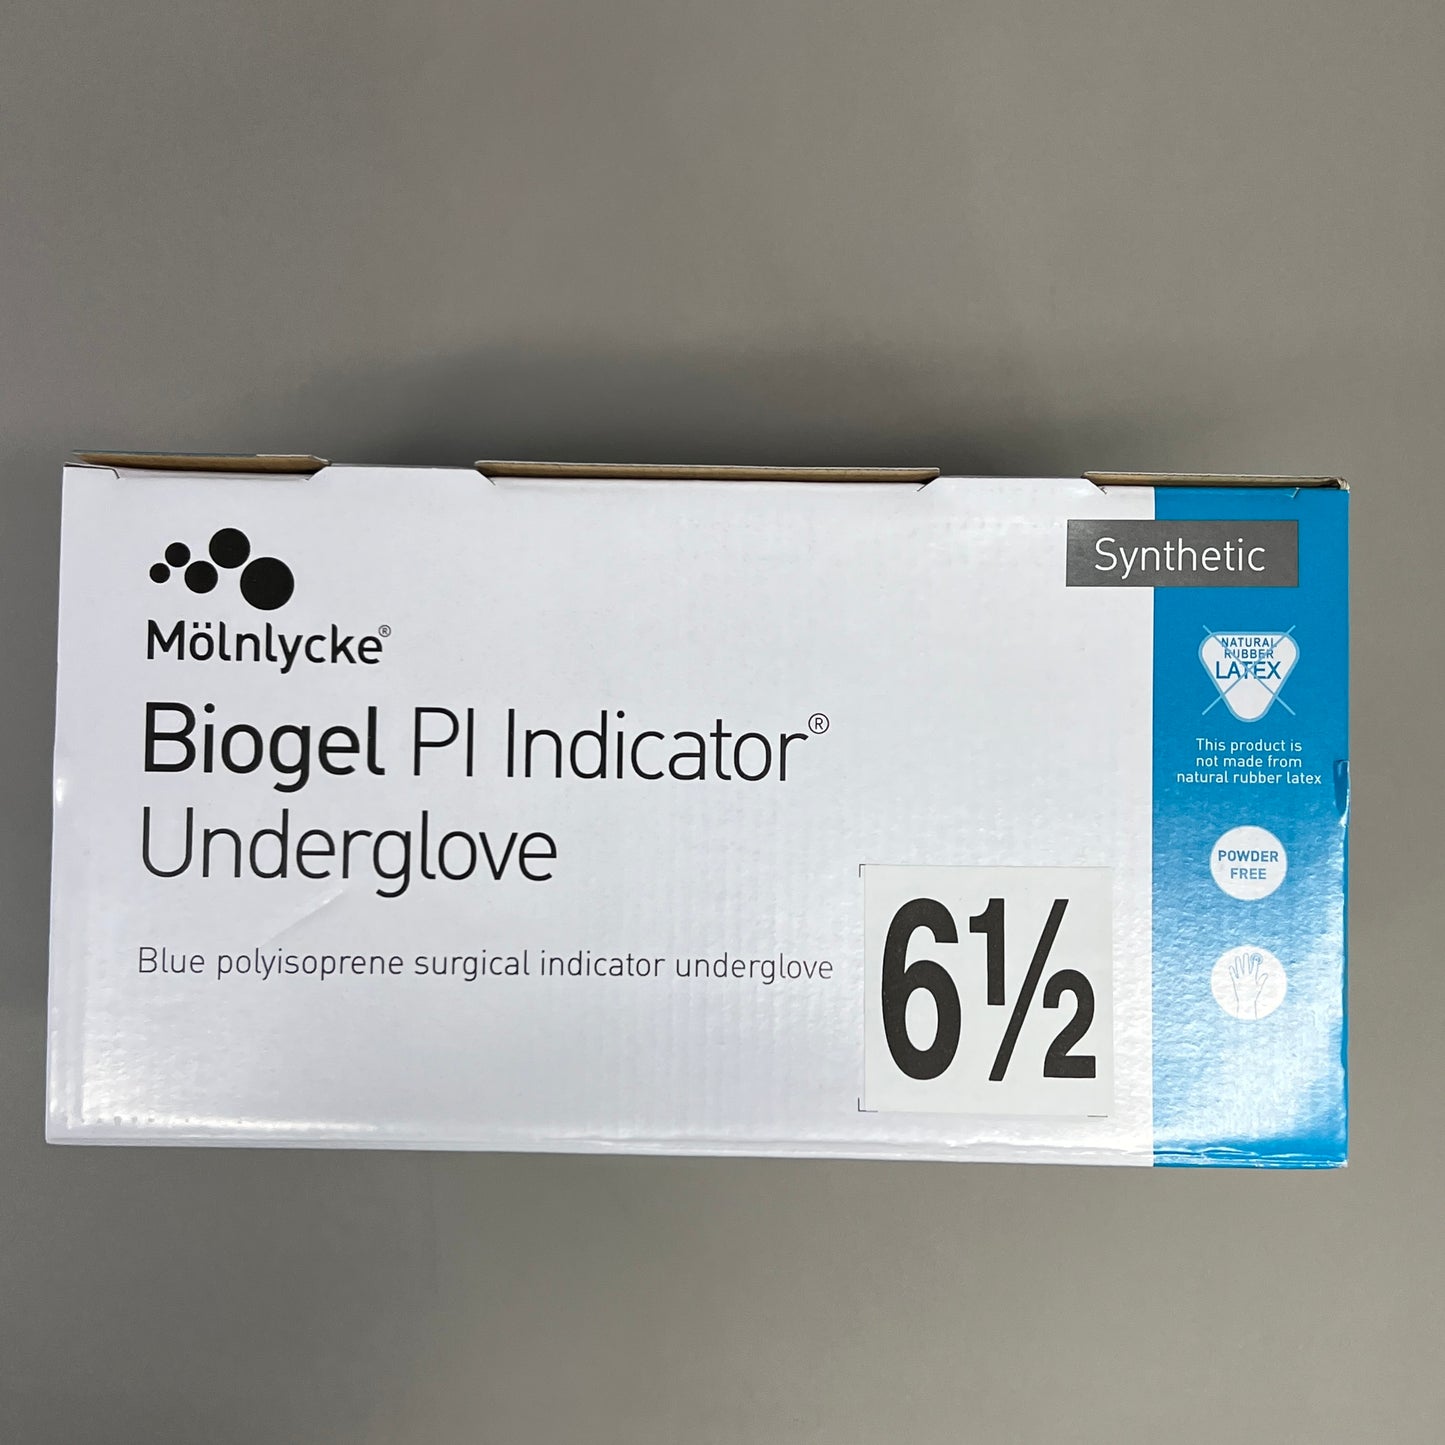 MOLNLYCKE Biogel Pl Indicator Synthetic Underglove SZ 6.5 Blue 50 Pairs 41665 (New)